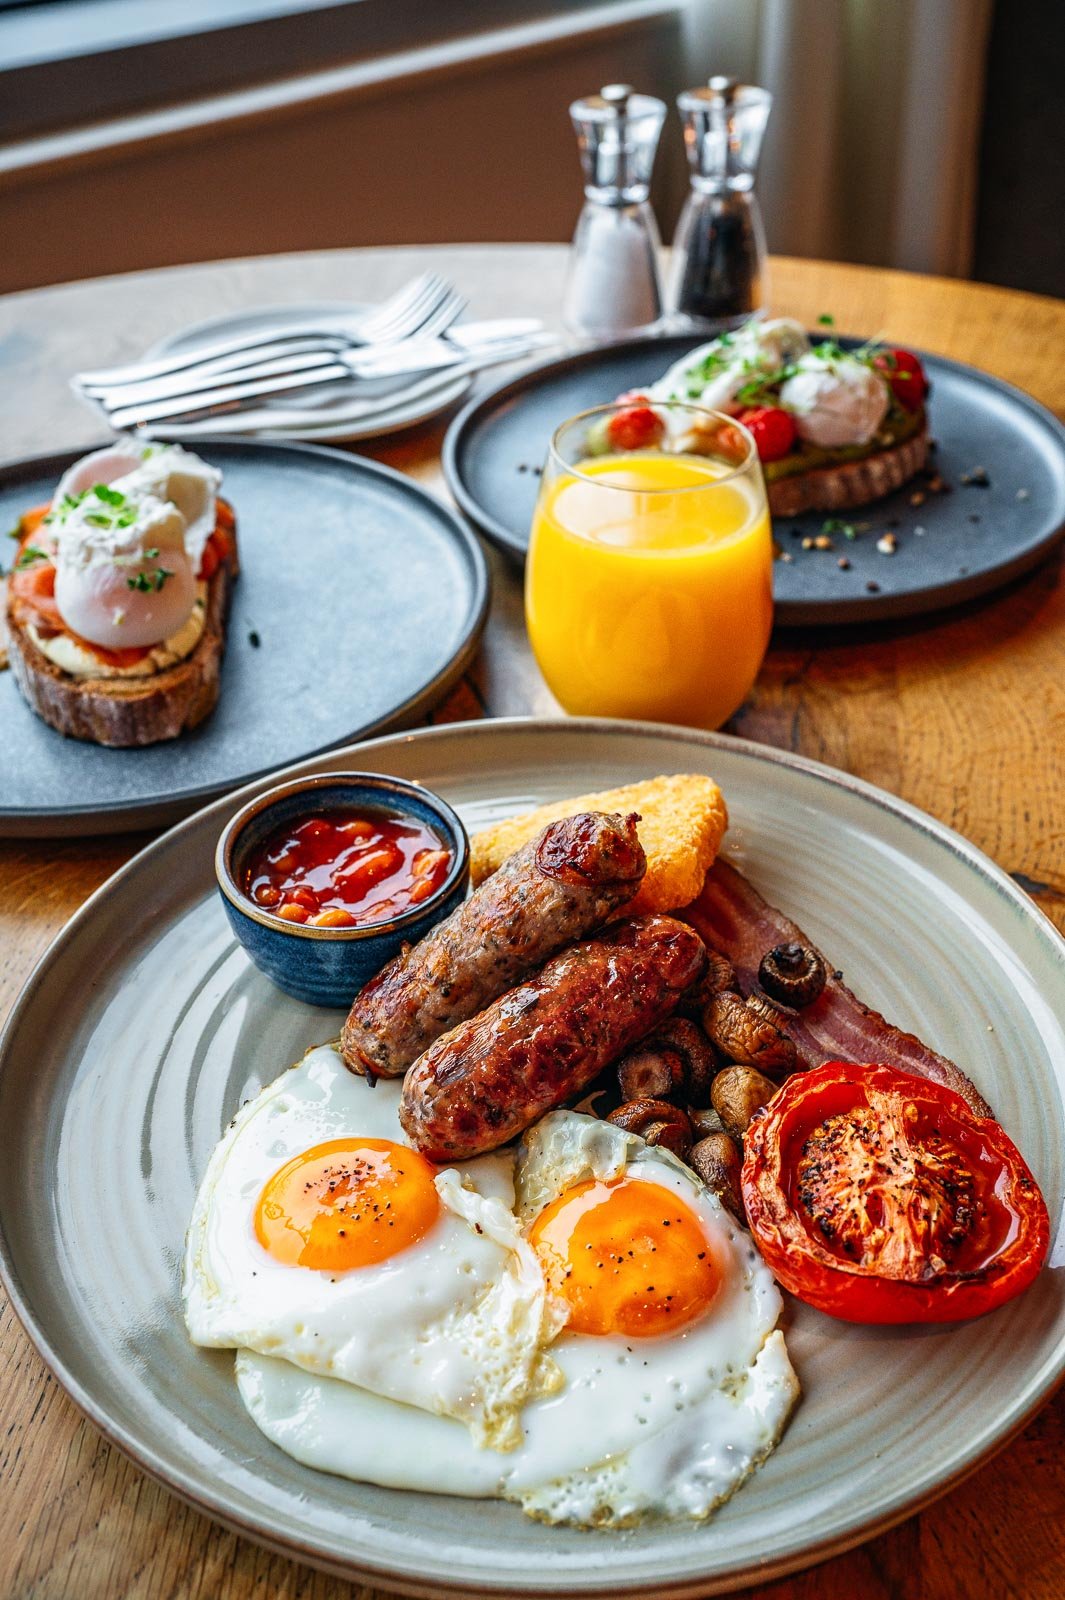 It's our monthly Breakfast Club this Saturday 11 May and BREAKING NEWS the weather is looking glorious! ☀

Breakfast in the sunshine on the green? We can't wait! Our breakfast offering includes everything from a full English to pancakes and egg speci